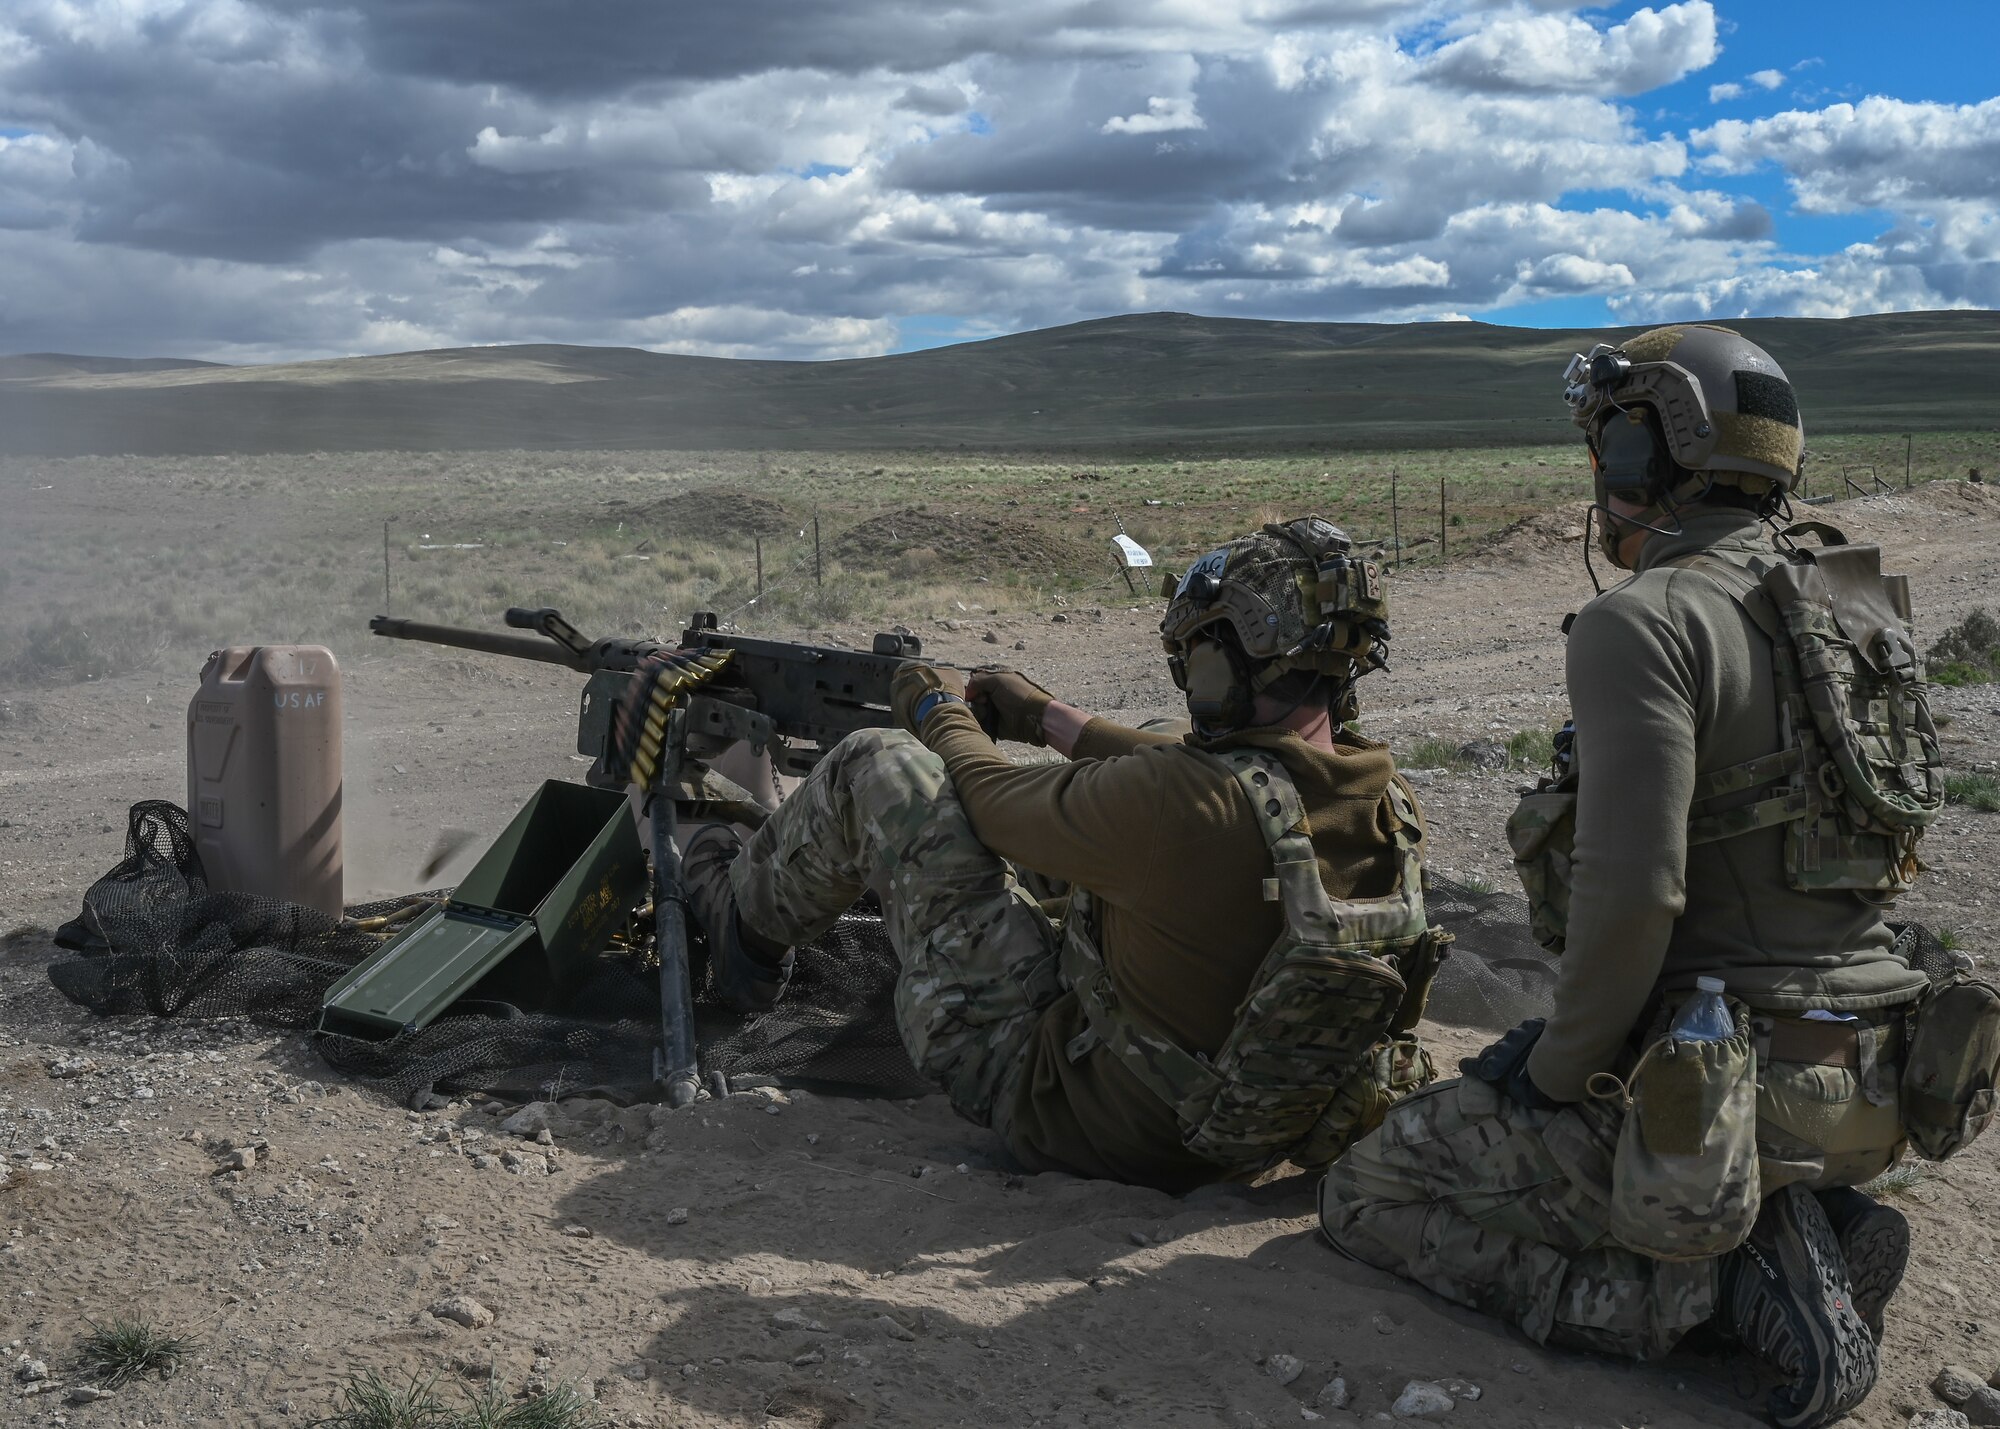 A U.S. Air Force tactical air control party Airman with the 5th Air Support Operations Squadron fires an M2 .50 caliber weapon system during a field training exercise at Yakima Training Center, Washington, April 26, 2021. The 5th ASOS fired approximately 60,000 rounds of M4, M2, M249, M240, and MK19 ammunition during their week long field training exercise, ensuring Air Combat Command’s warfighting capability and presence. (U.S. Air Force photo by Airman 1st Class Callie Norton)